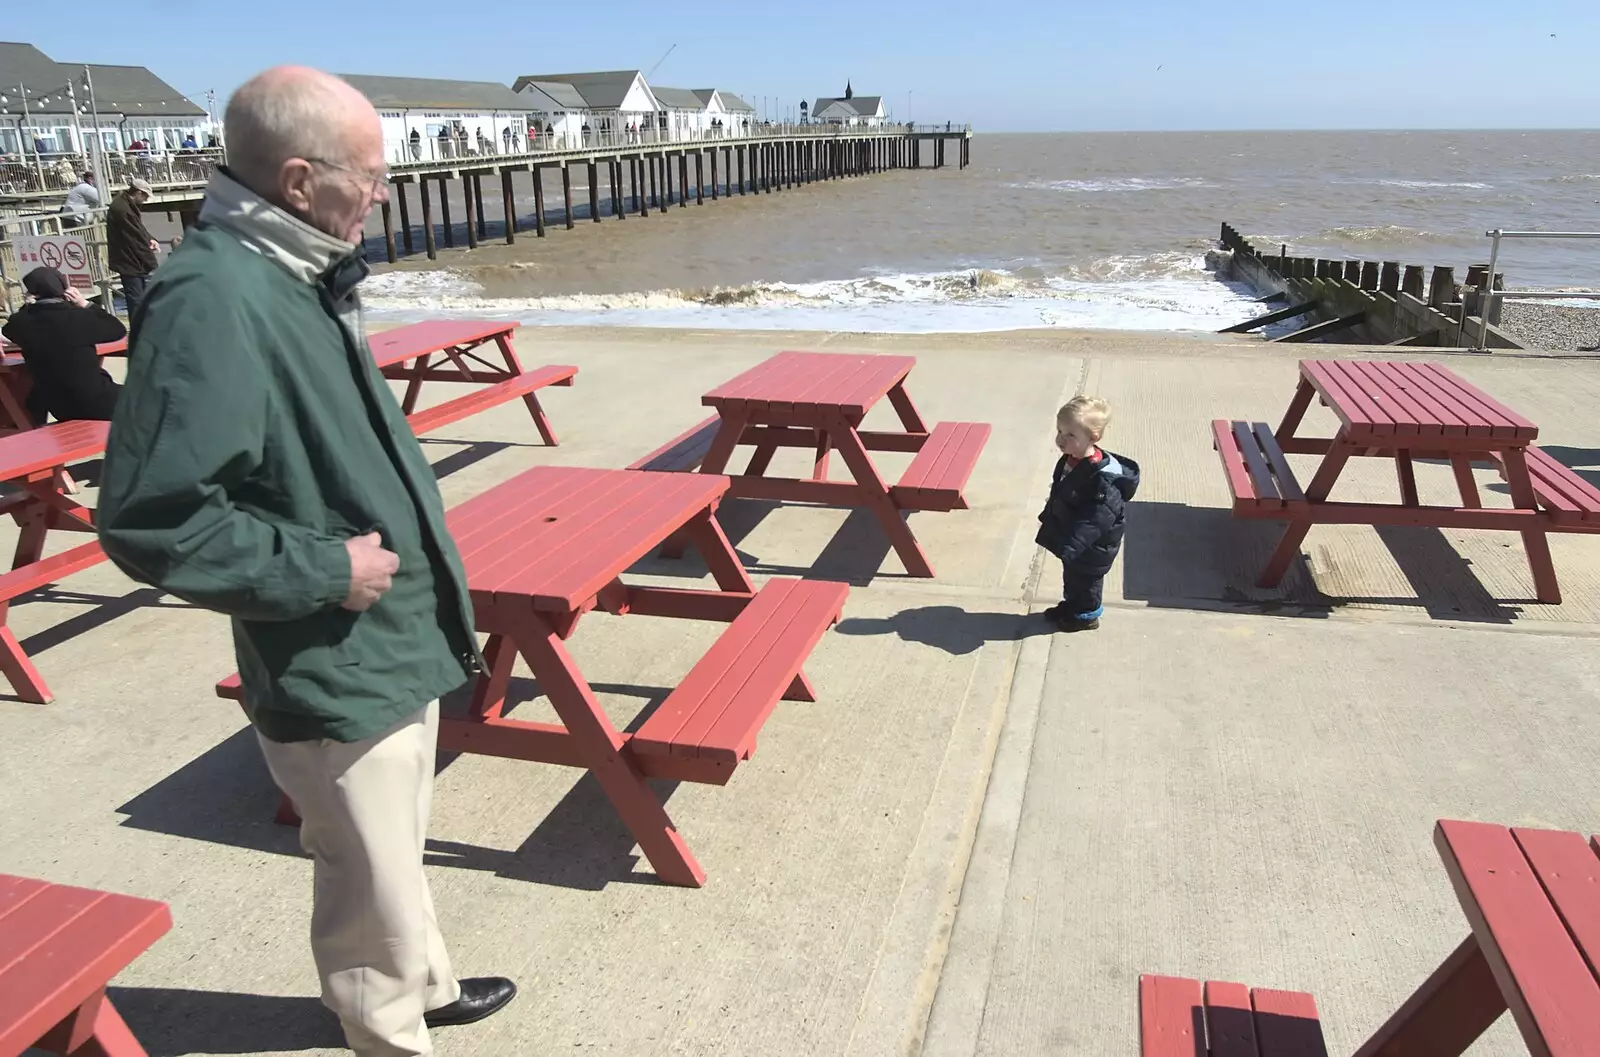 Grandad and The Boy mill around Southwold prom, from Stupid Volcanic Ash: Southwold and Stuston Farm Shop, Suffolk - 18th April 2010